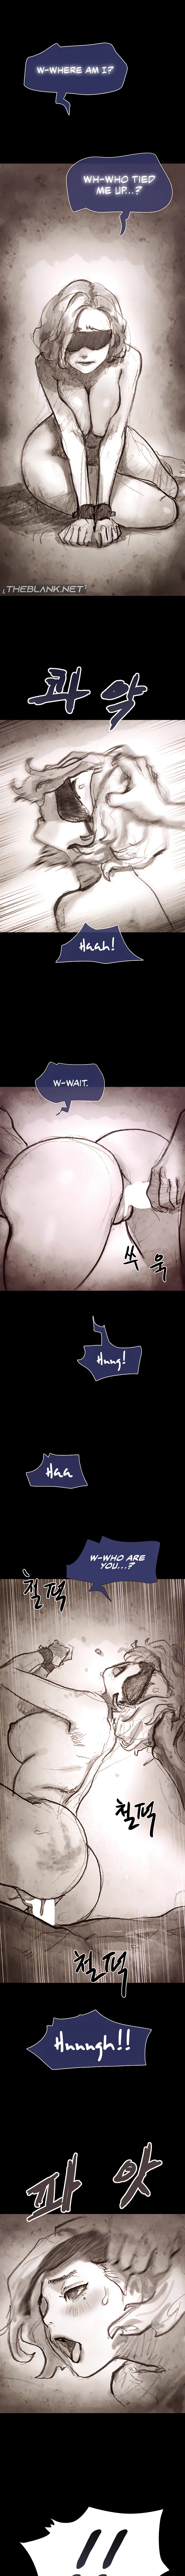 not-to-be-missed-chap-33-8